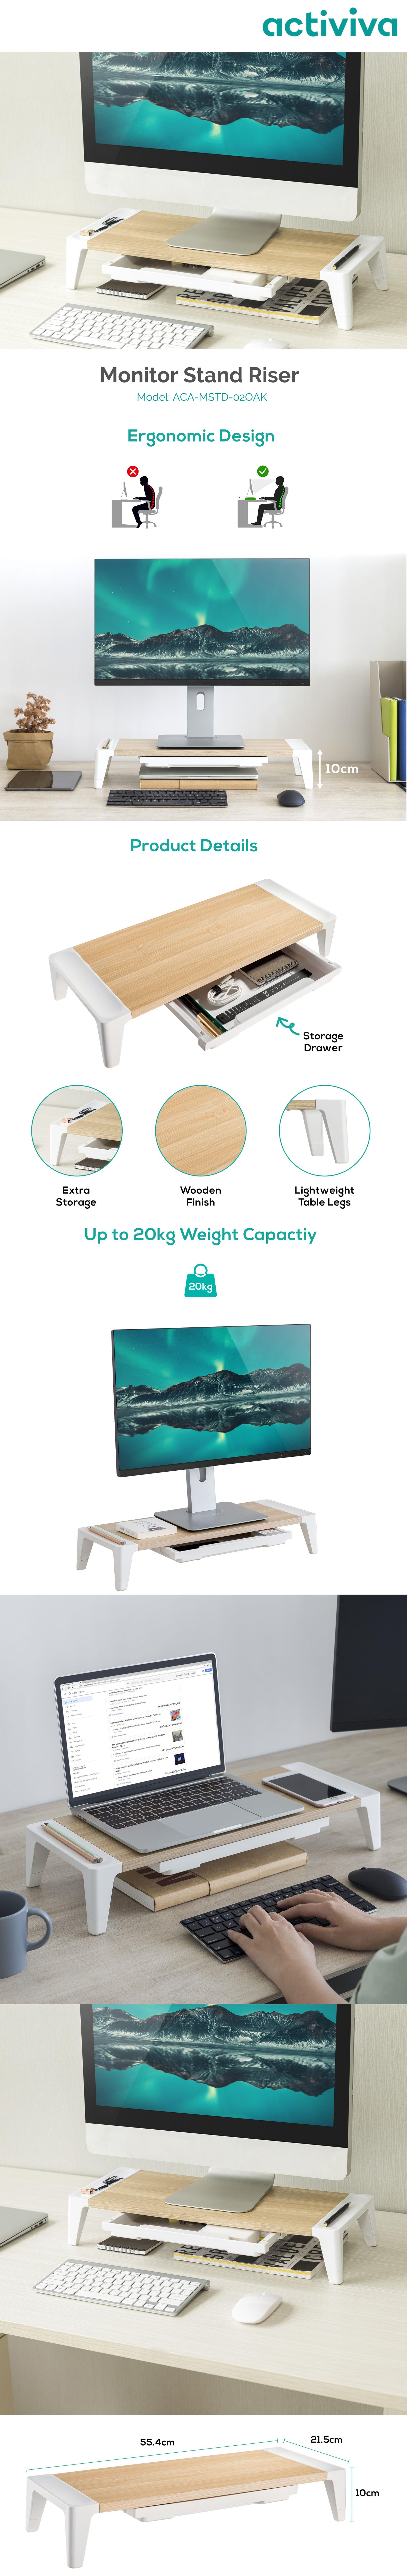 A large marketing image providing additional information about the product mbeat Activiva ErgoLife Monitor Stand Riser w/ Storage Drawer - Additional alt info not provided